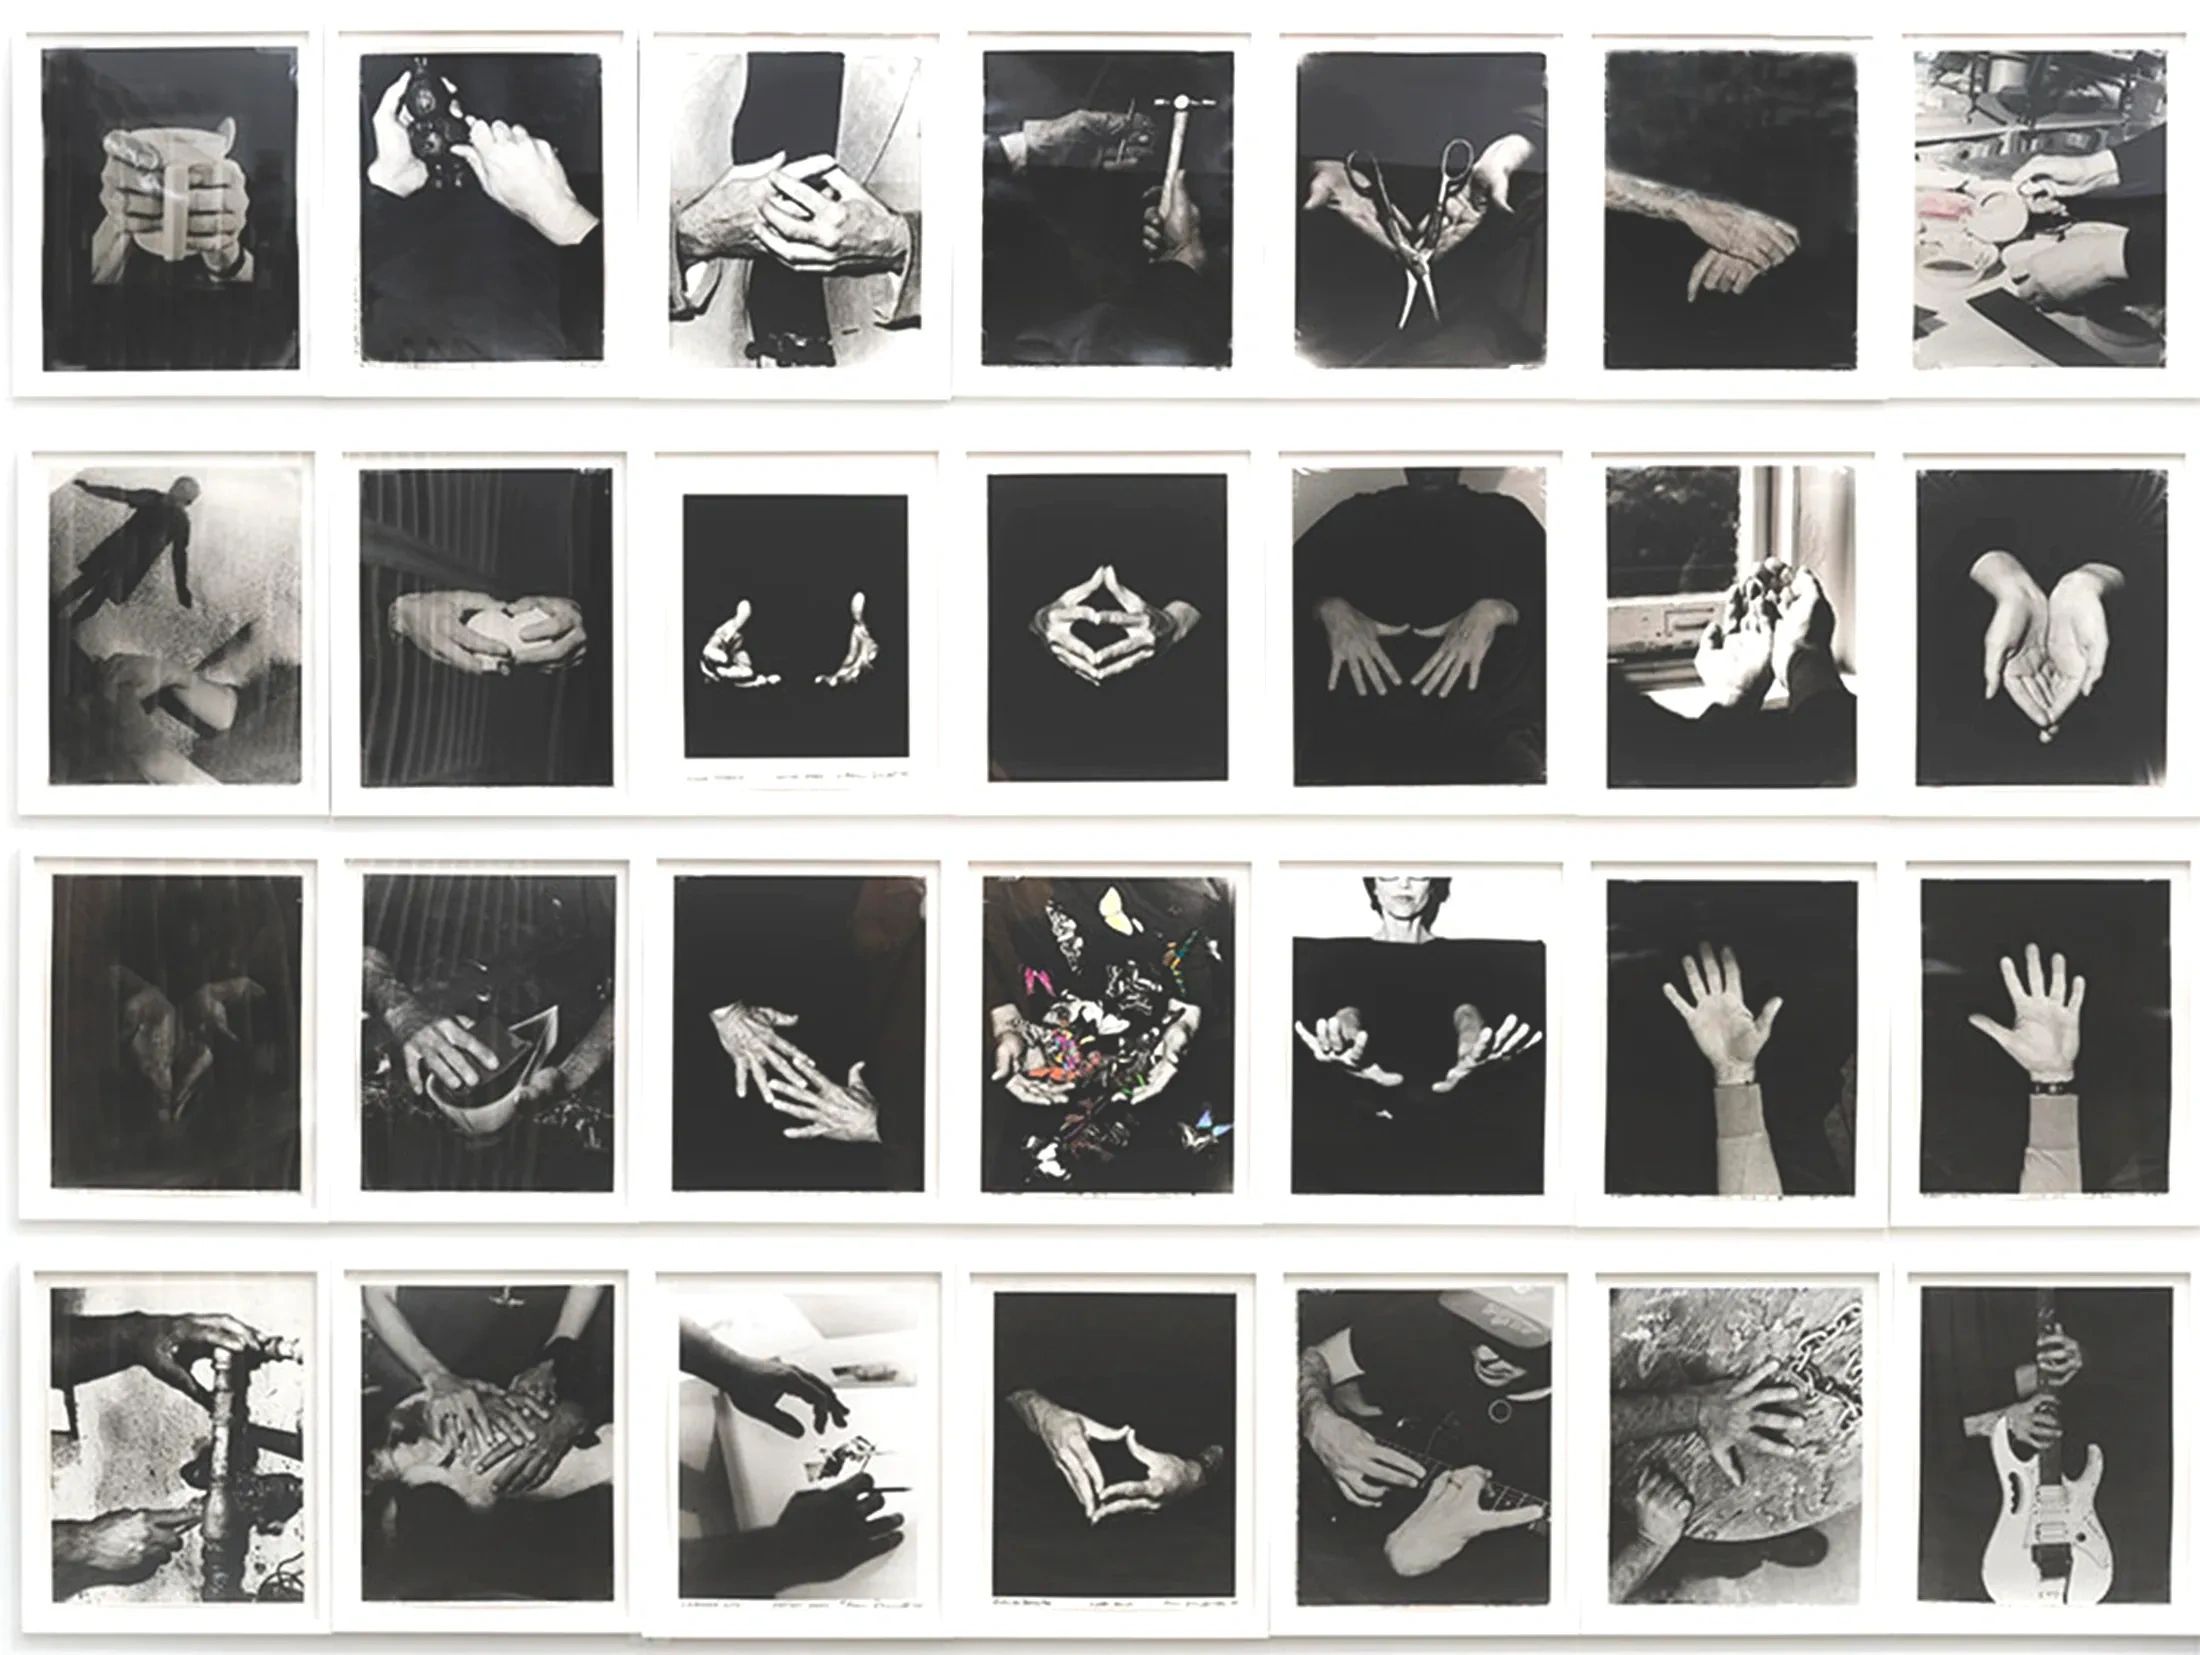 Artists' Hands Grid Continuum a series of portraits begun in 1984 in both Los Angeles & New York Cit